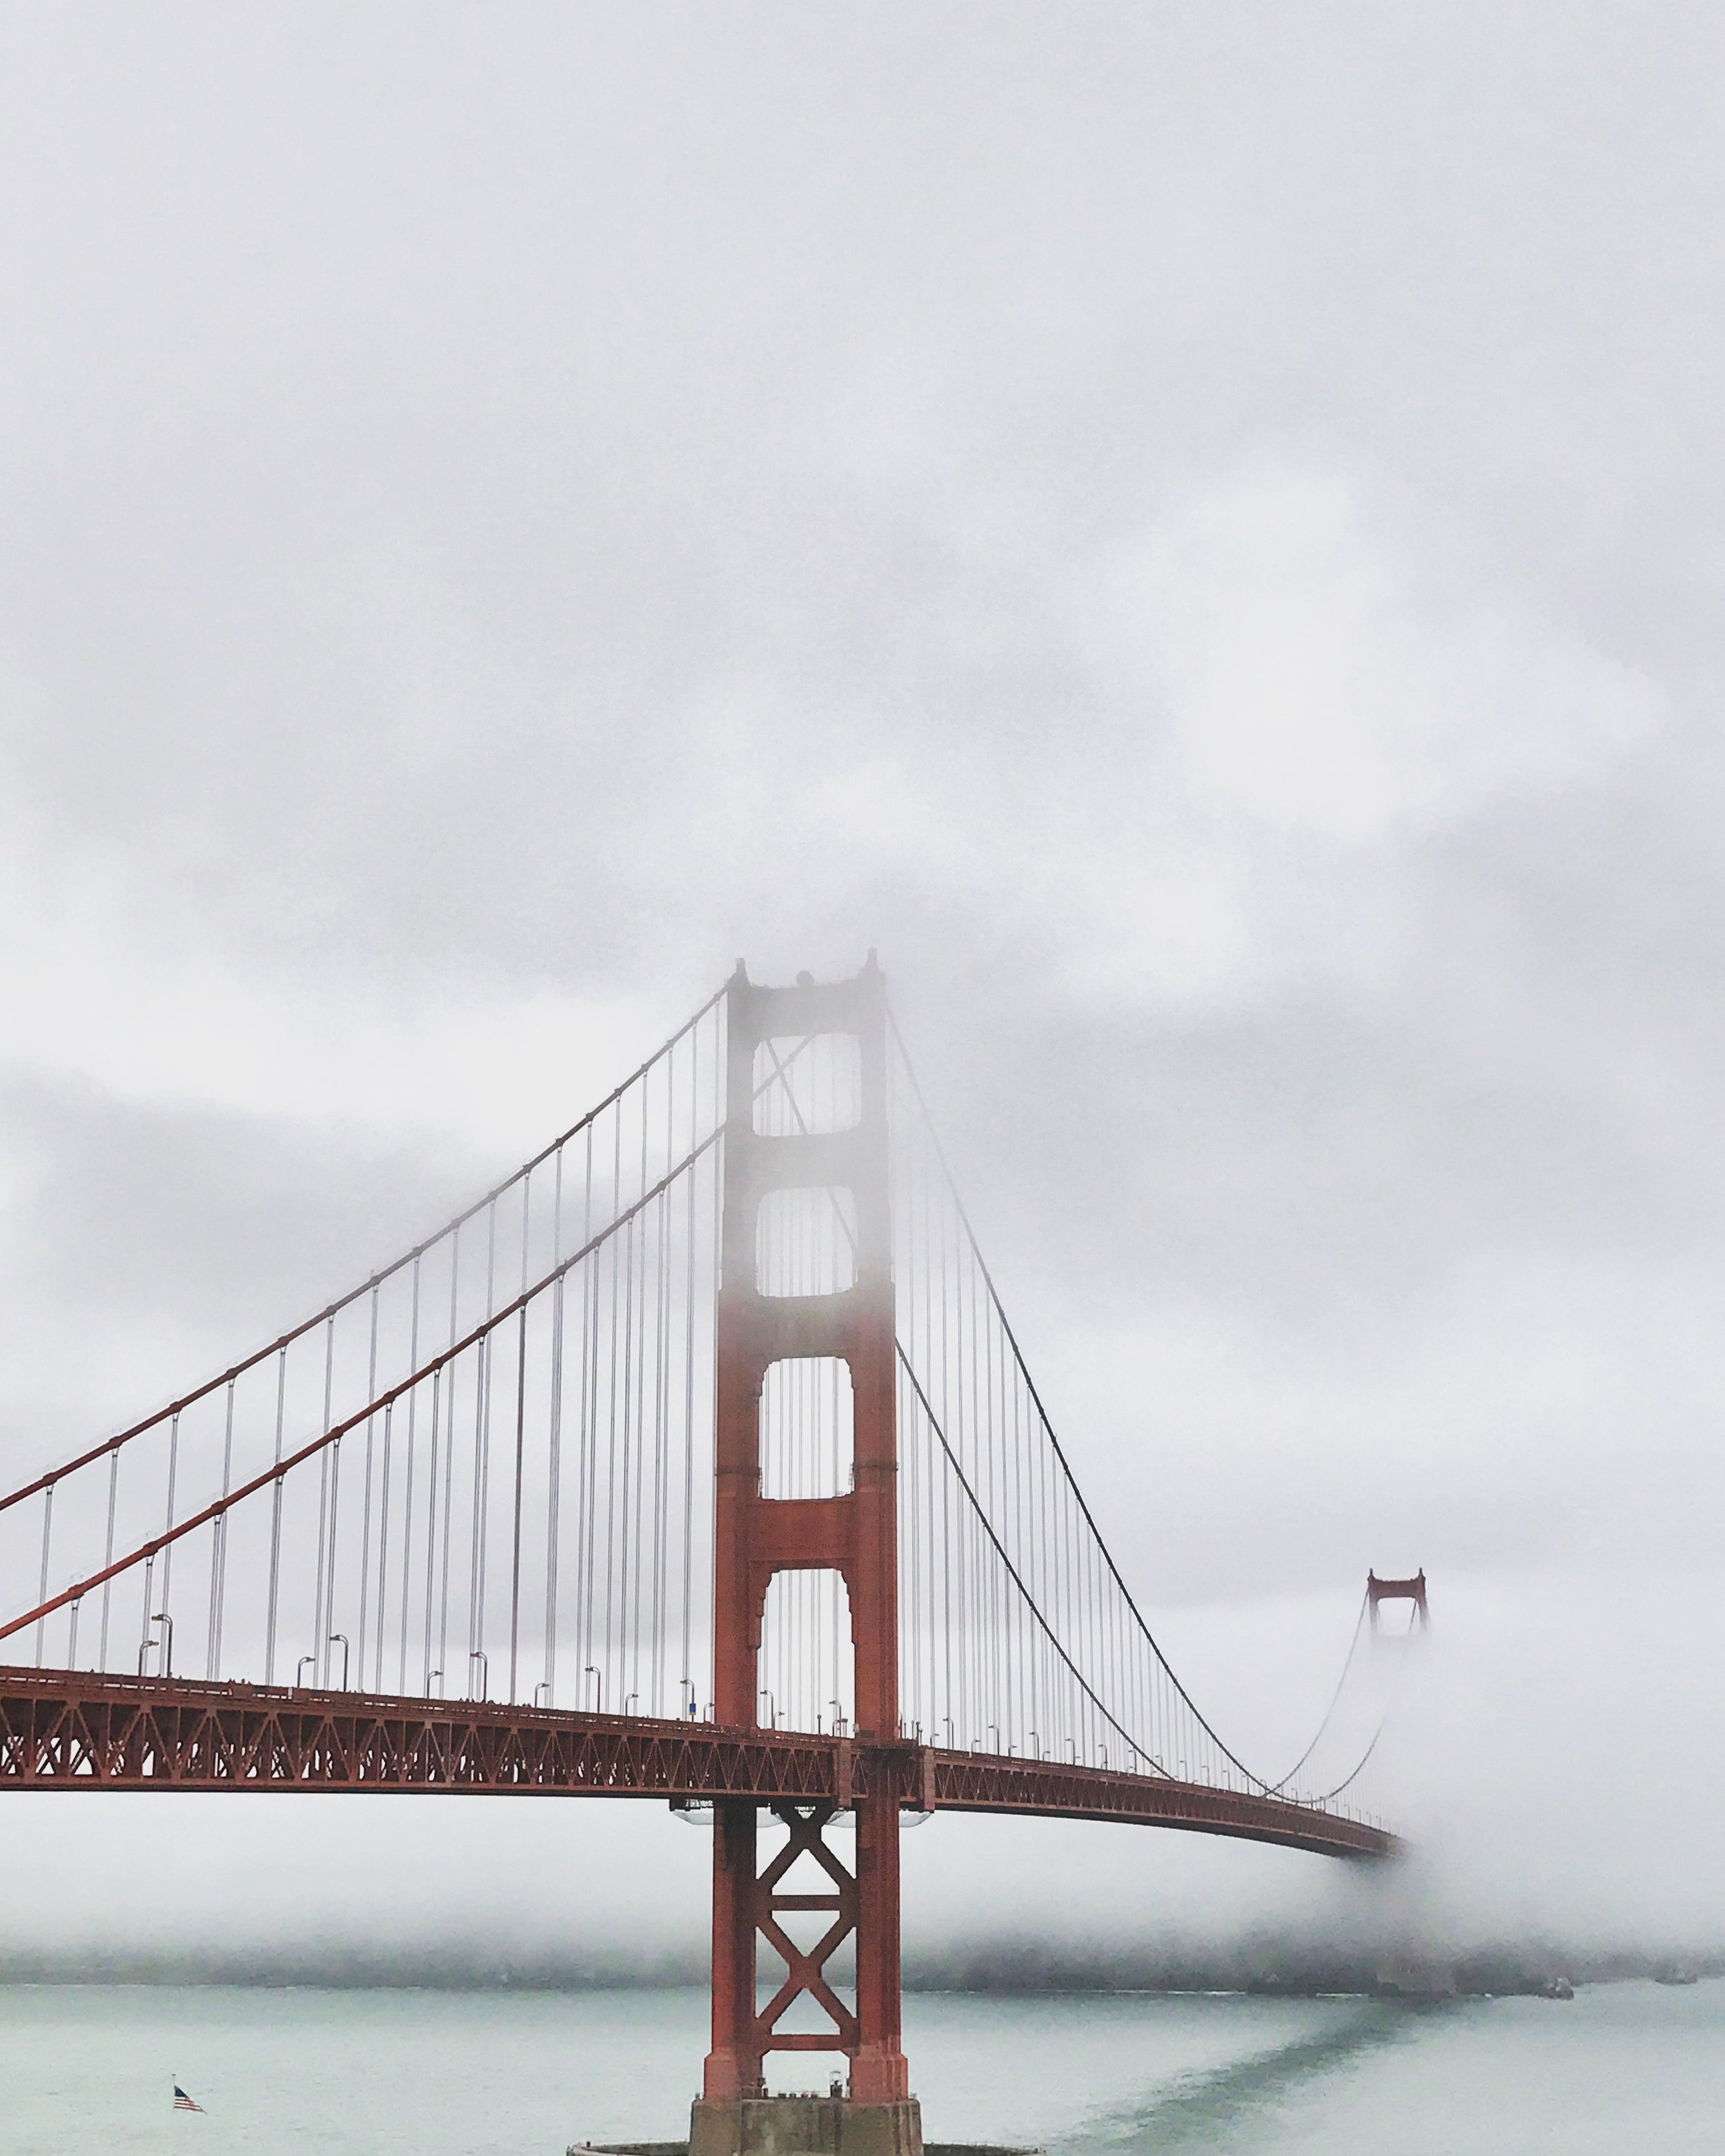  It was a cold and windy day in San Francisco, with the Golden Gate Bridge enveloped in mist. 